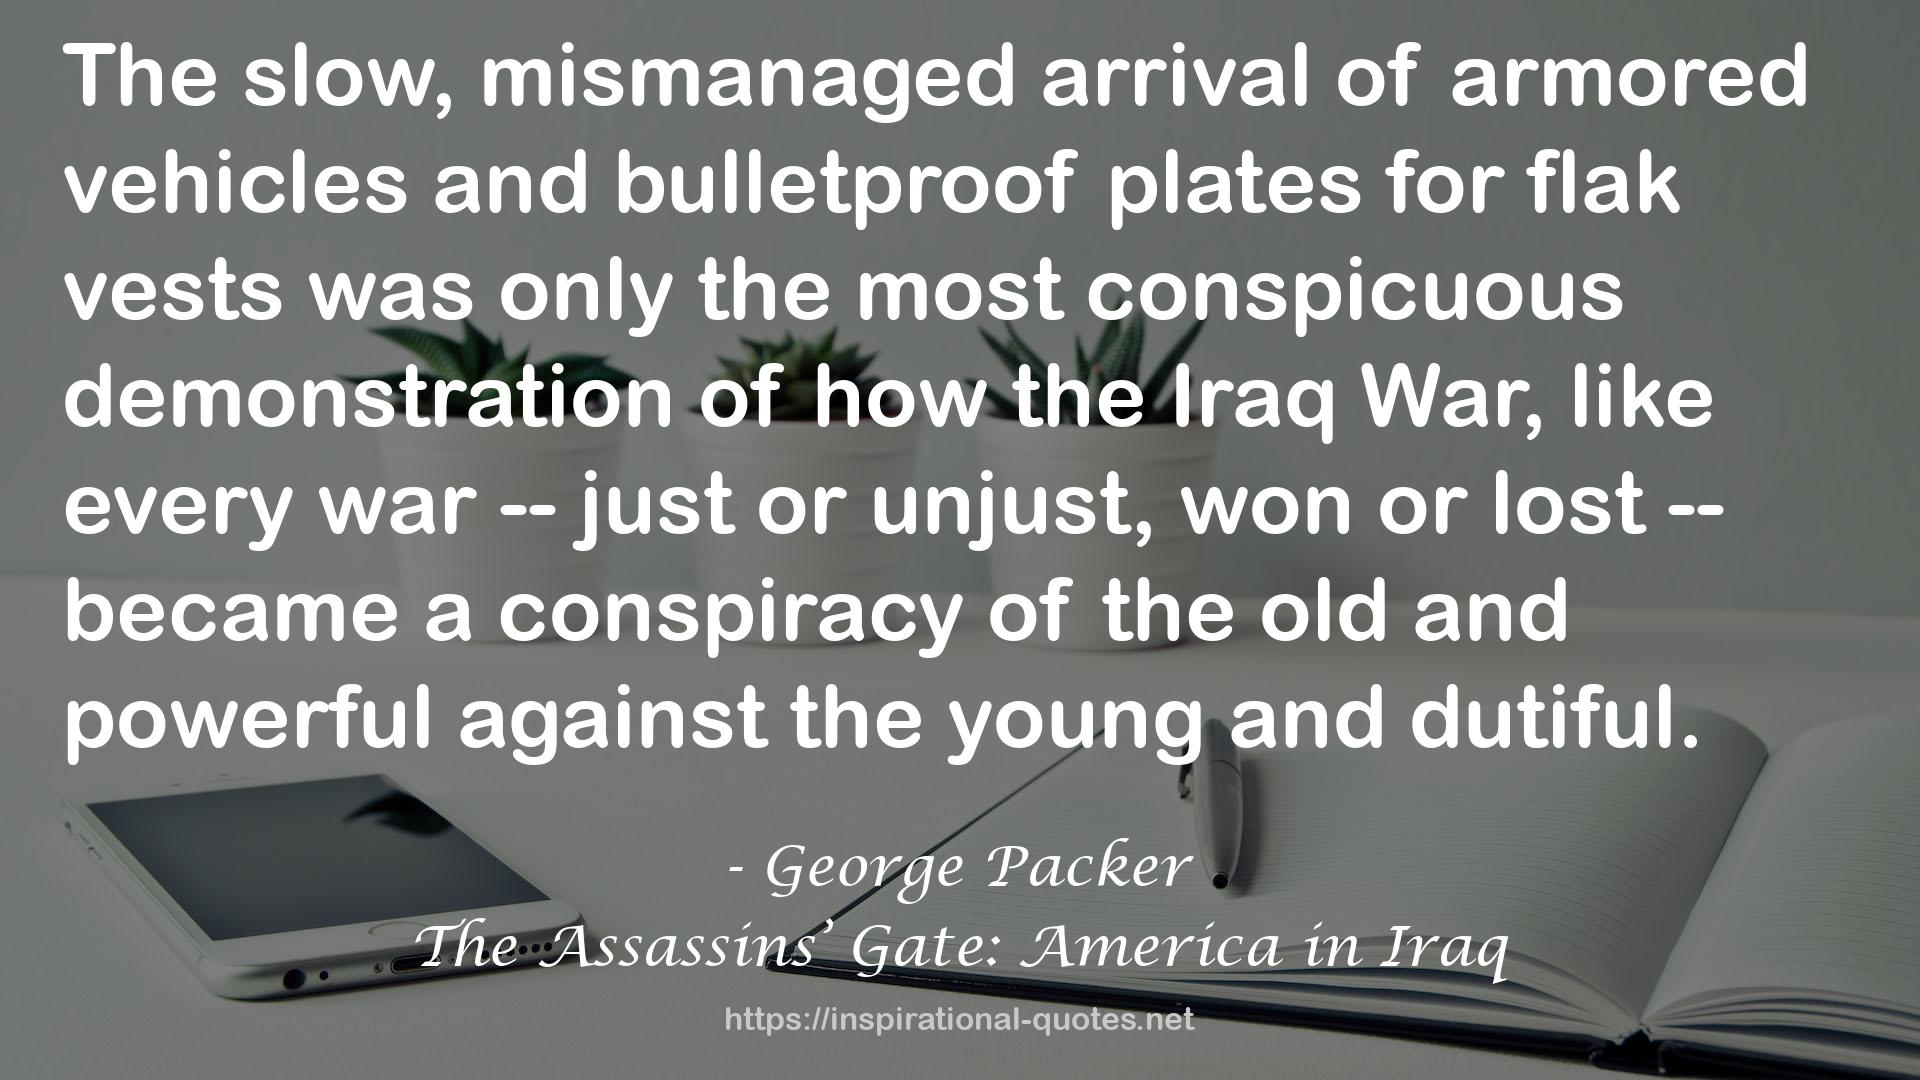 The Assassins’ Gate: America in Iraq QUOTES